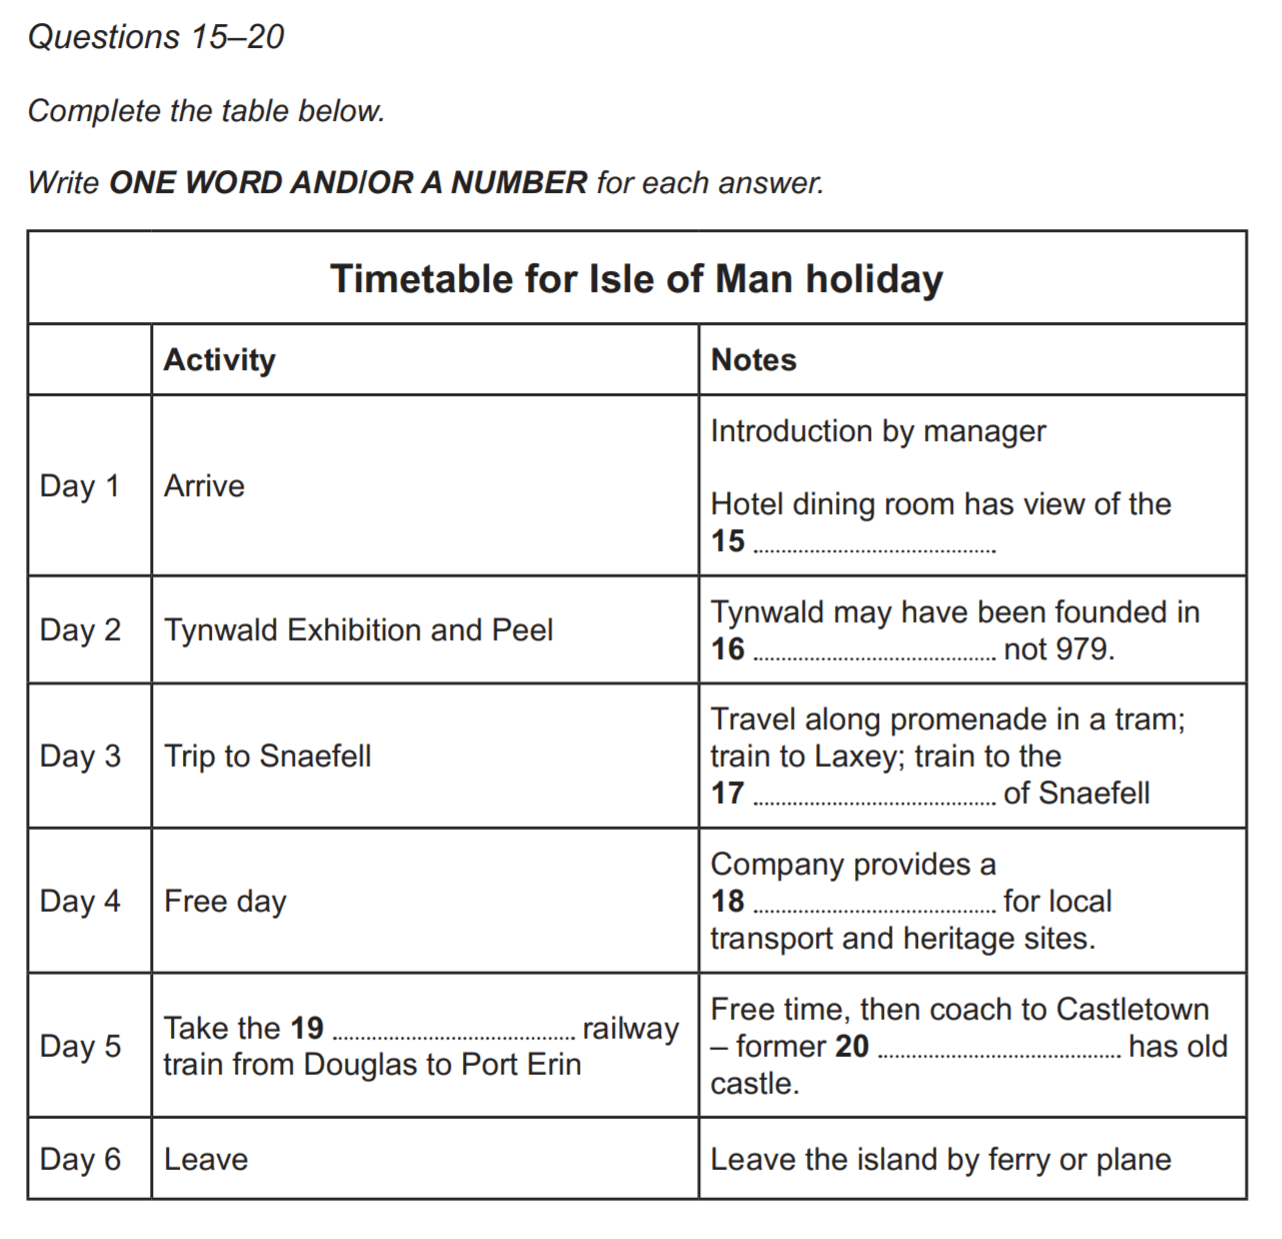 timetable for isle of man holiday ielts listening